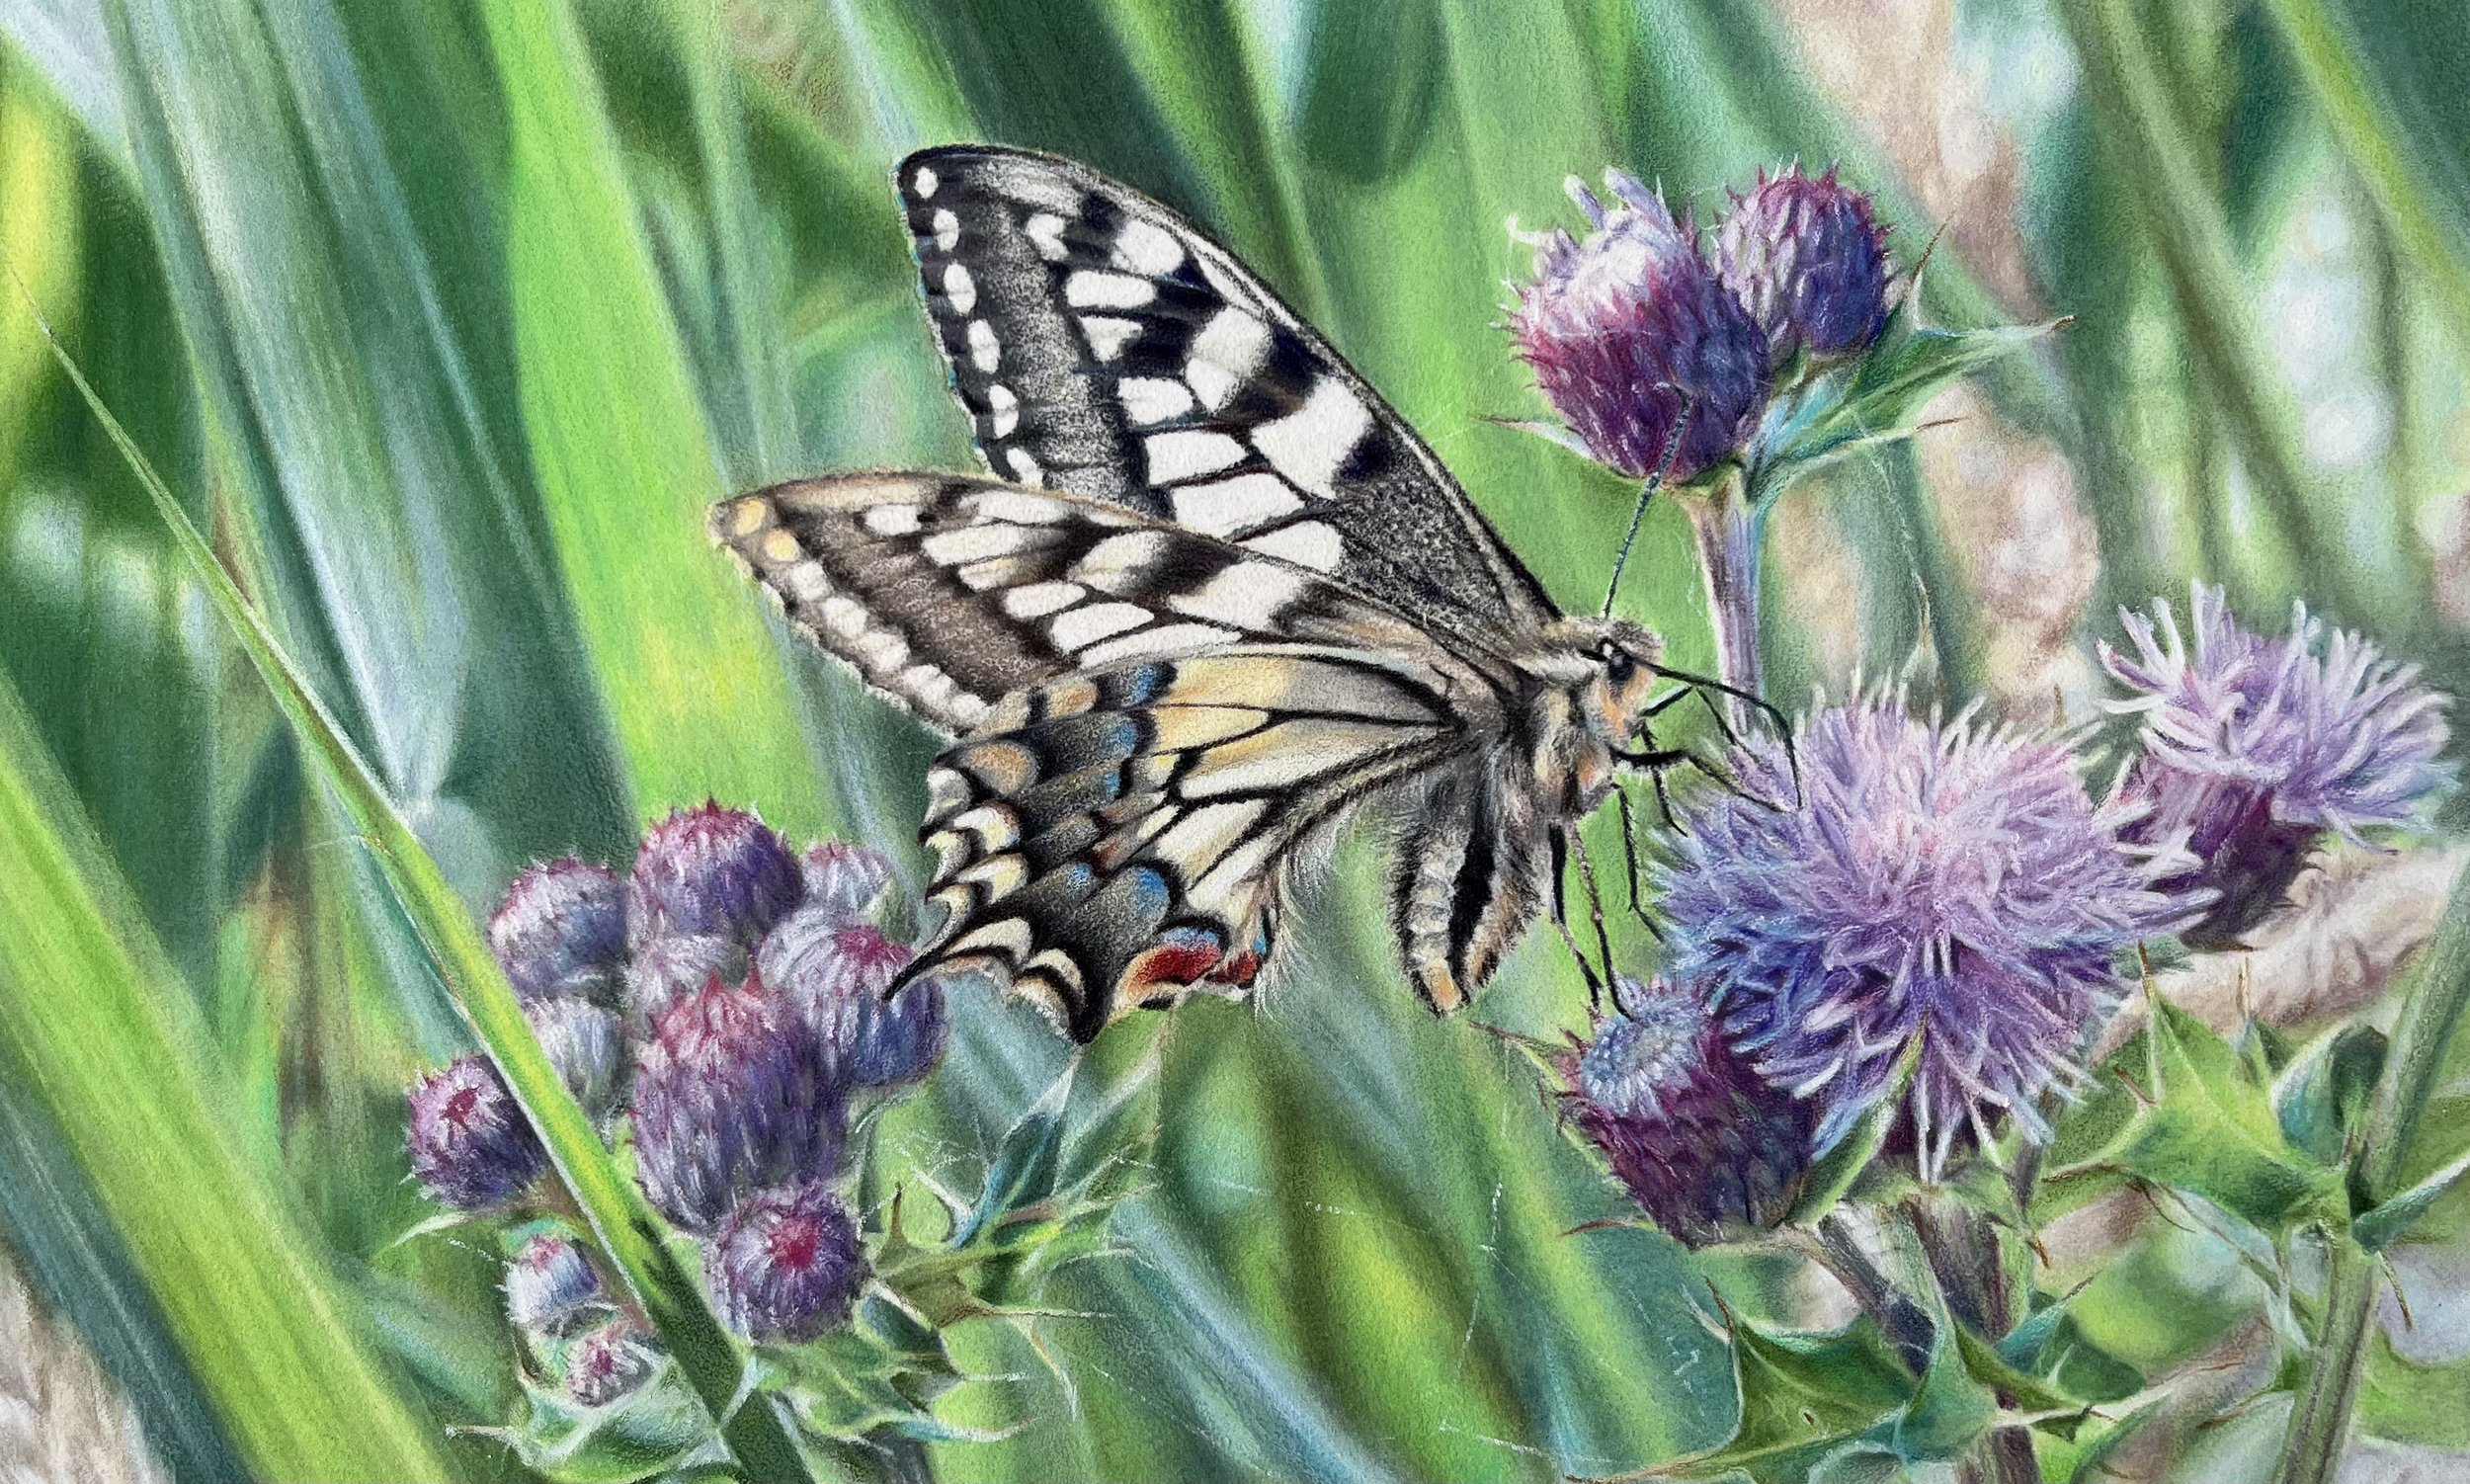 Harwood_Amii_Swallowtail_CouredPencil_11by7inches.jpg